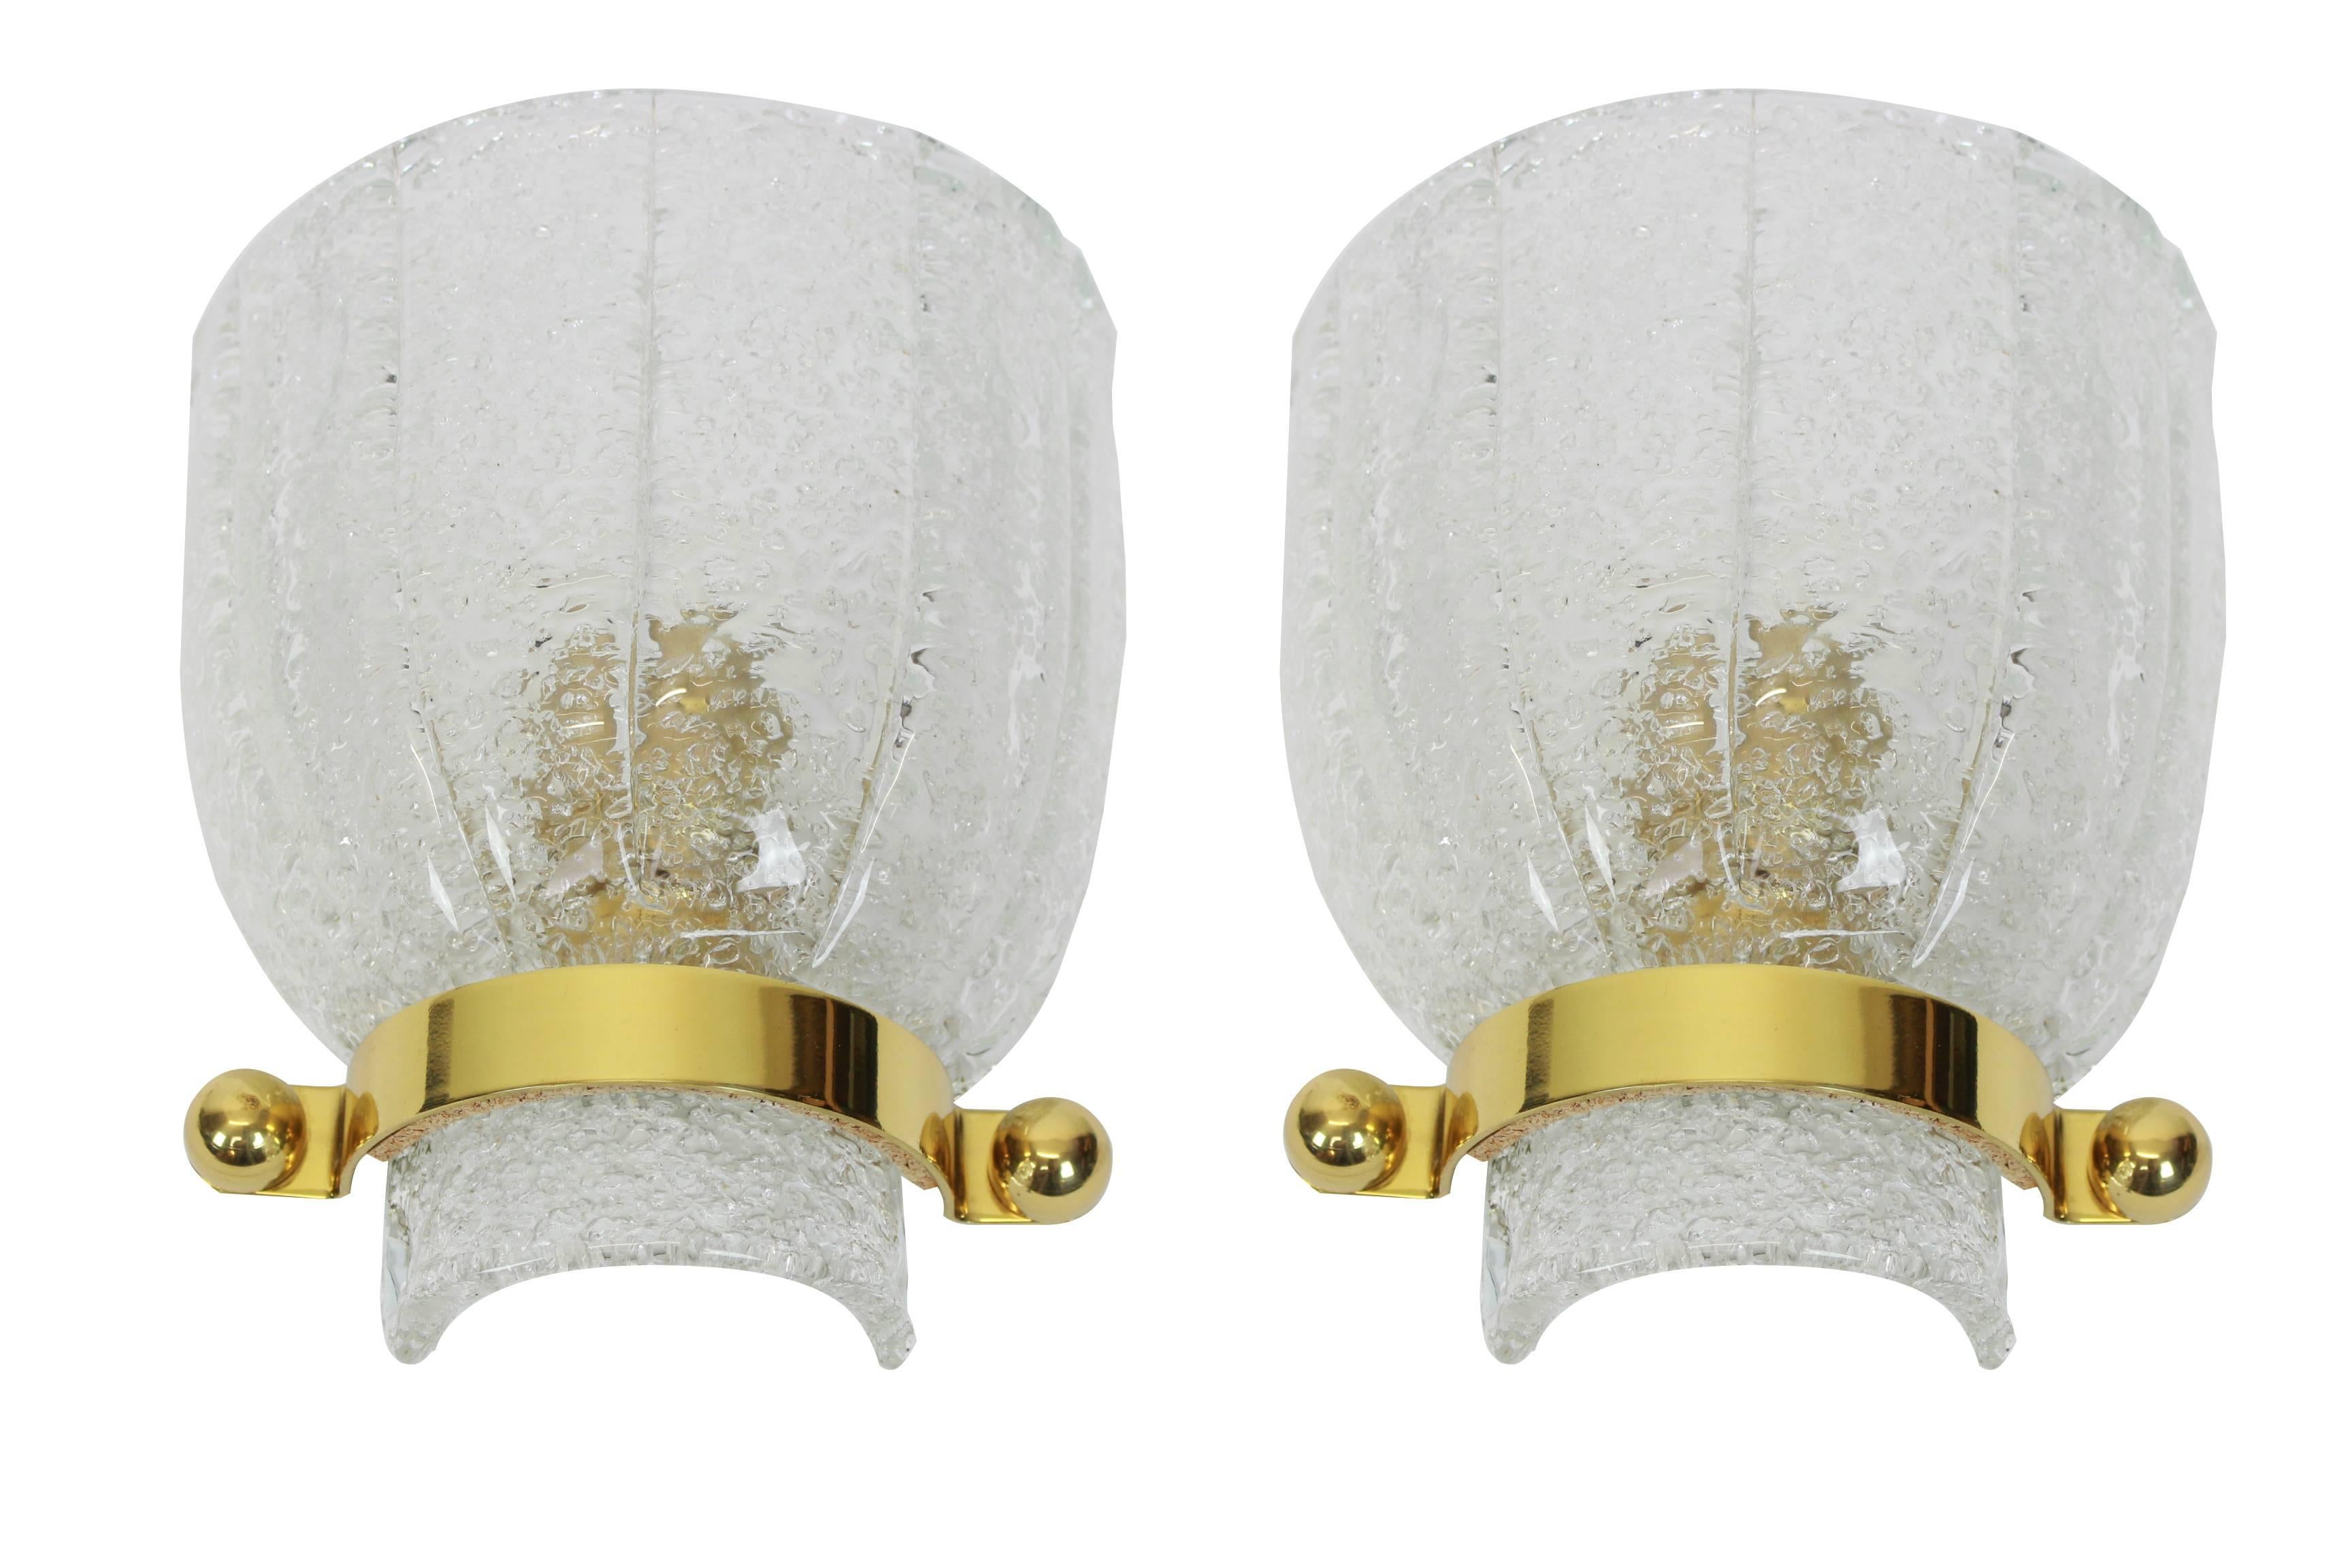 Wonderful pair of Mid-Century brass wall sconces with ice glass, made by Kalmar, Austria, manufactured, circa 1960-1969.

High quality and in very good condition. Cleaned, well-wired and ready to use. 

Each Sconce requires 1 x E14 Standard